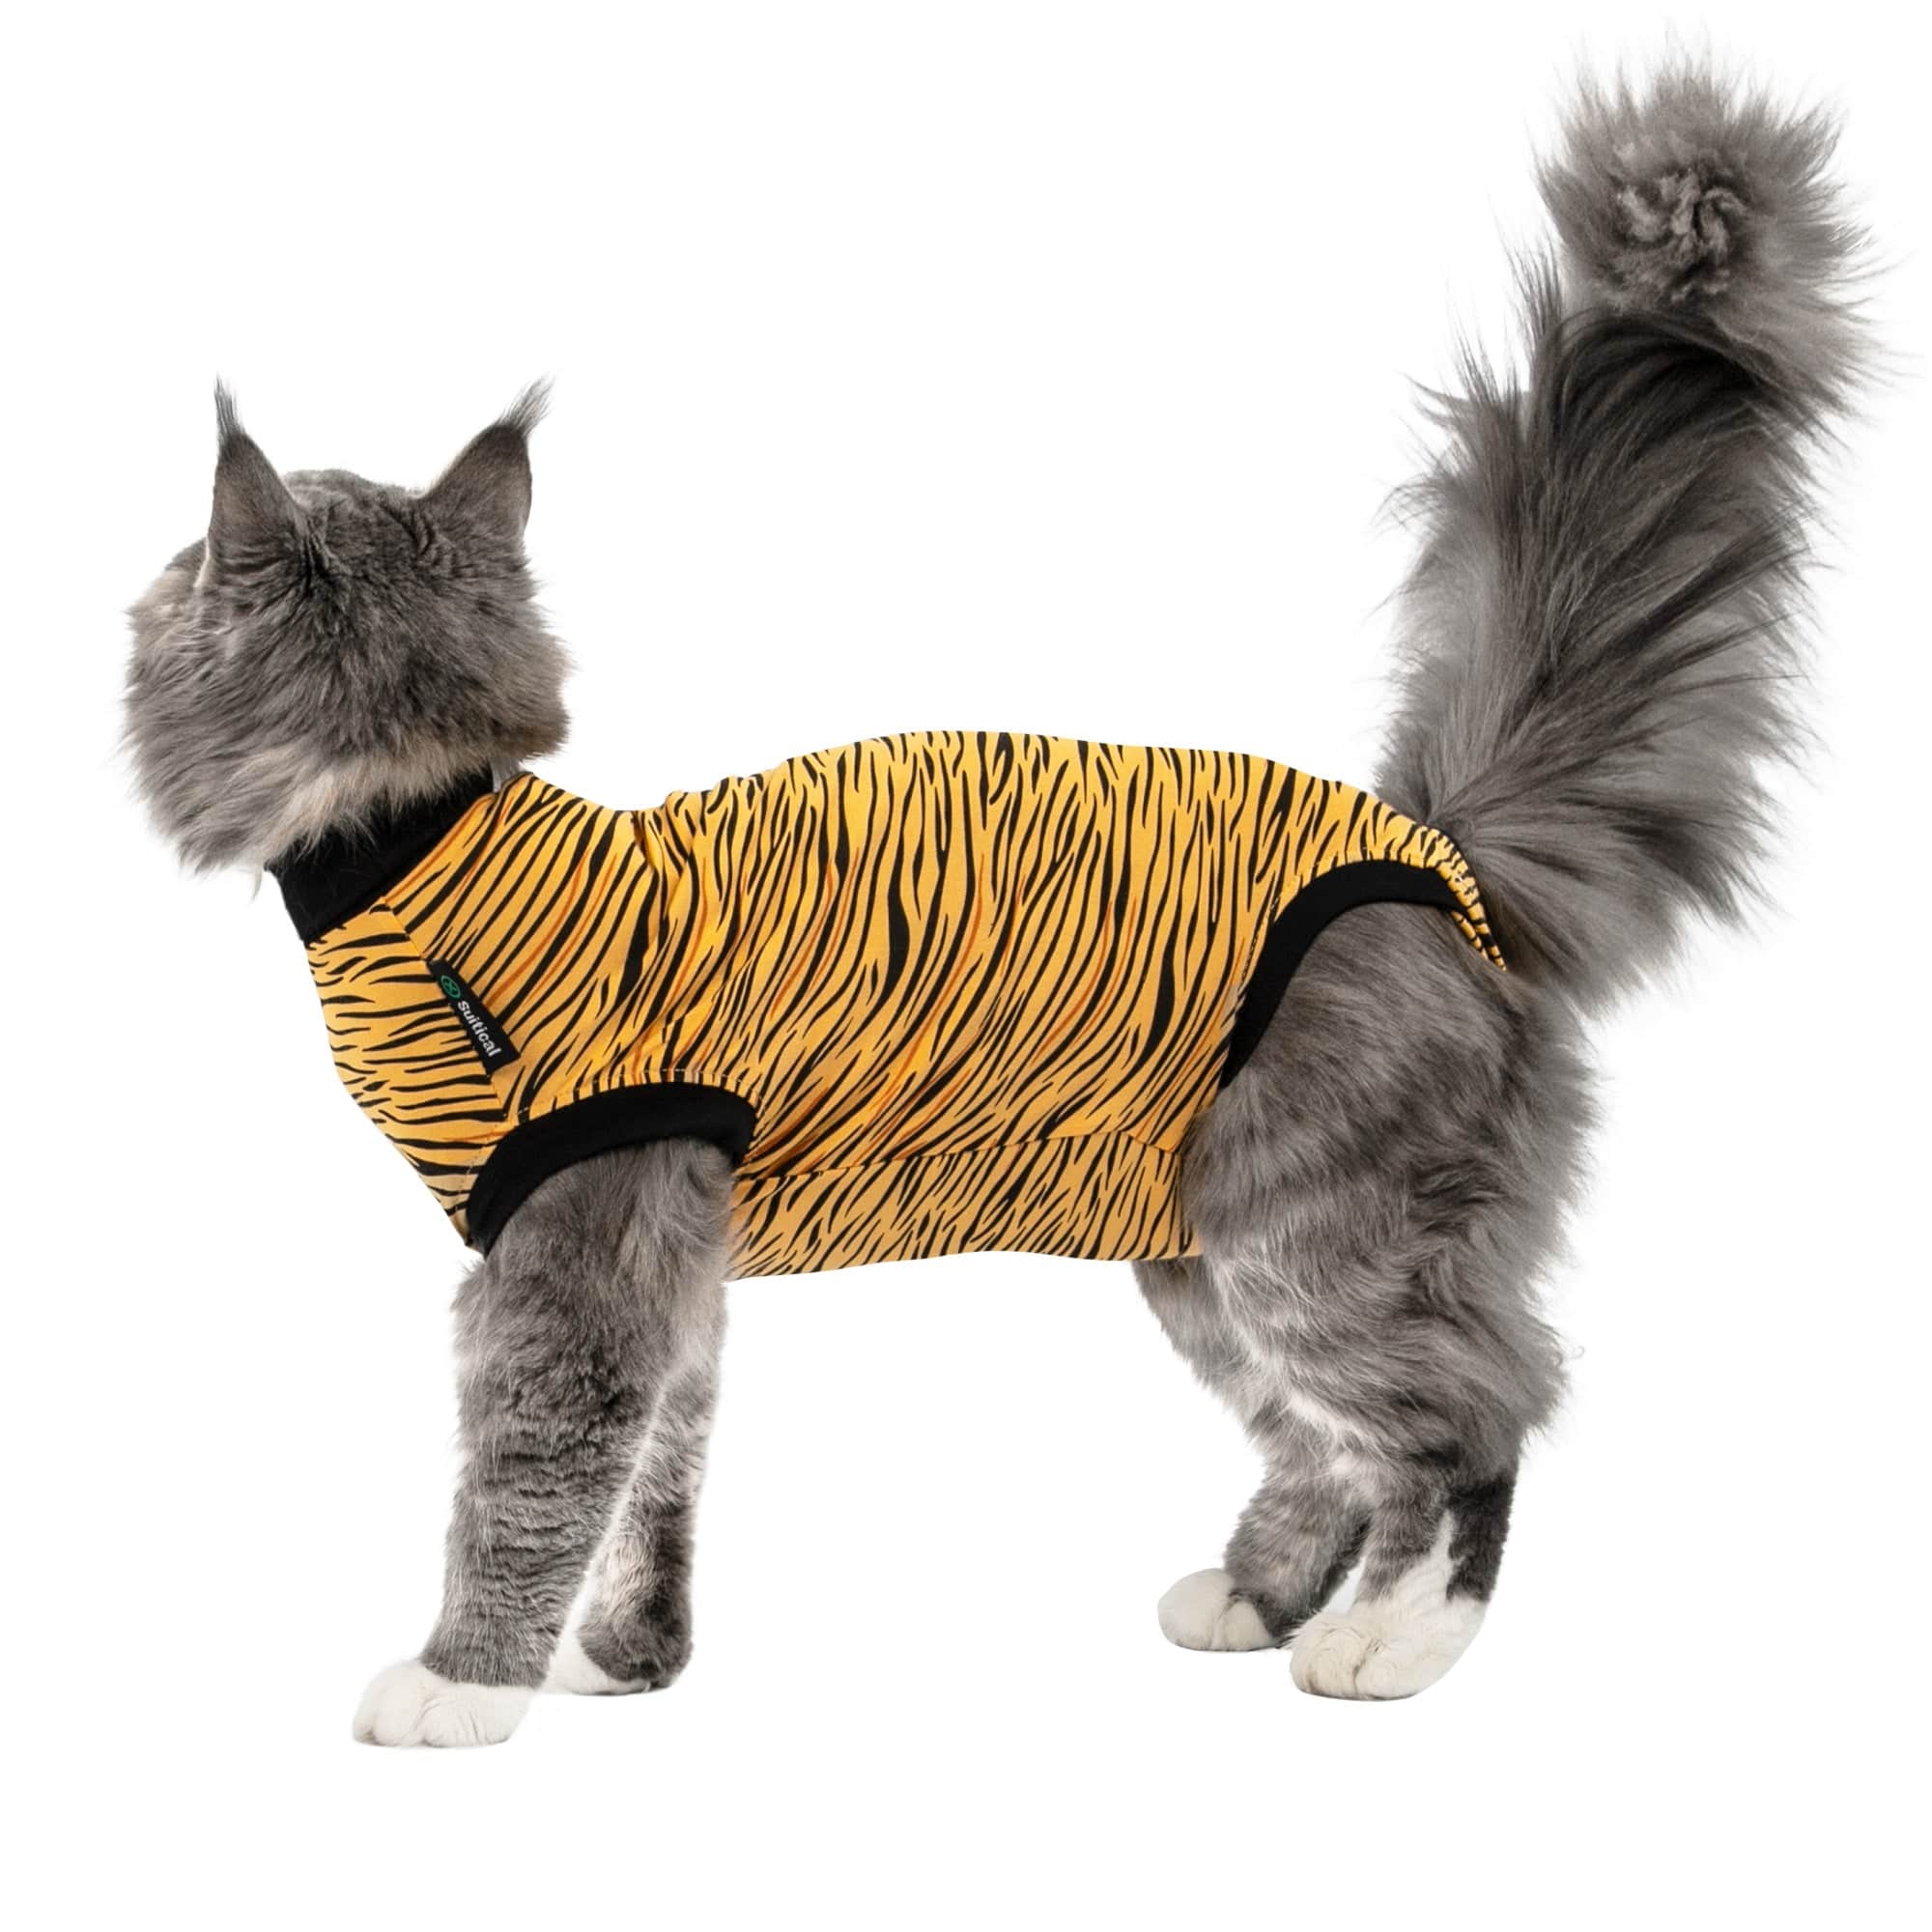 Tiger cat recovery suit by Suitical